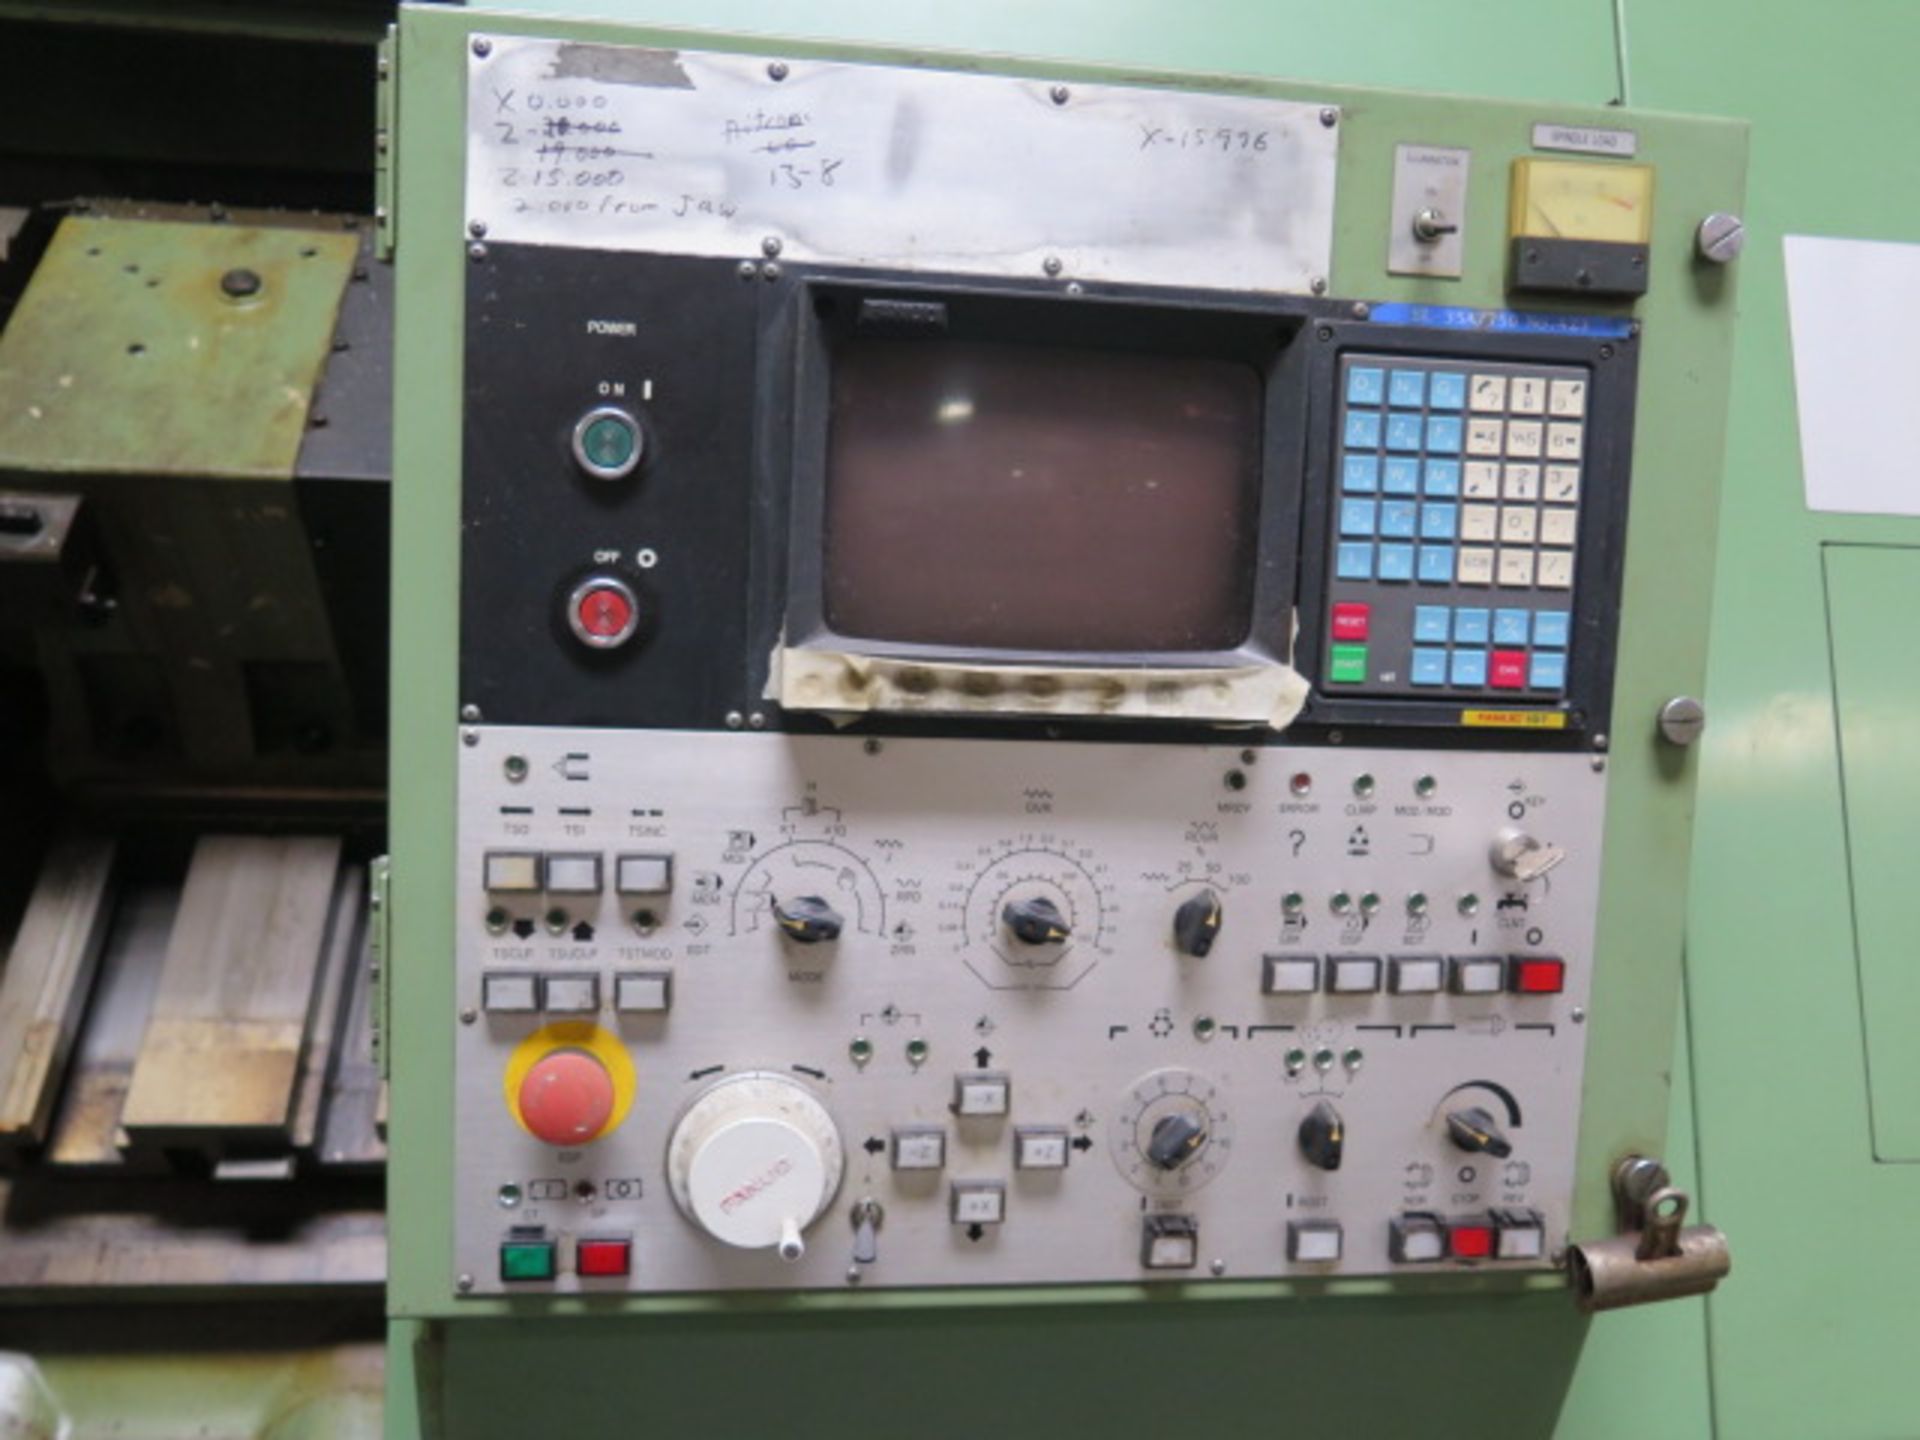 Mori Seiki SL-35A CNC Turning Center s/n 423 w/ Fanuc 10T Controls, 12-Station Turret, SOLD AS IS - Image 10 of 13